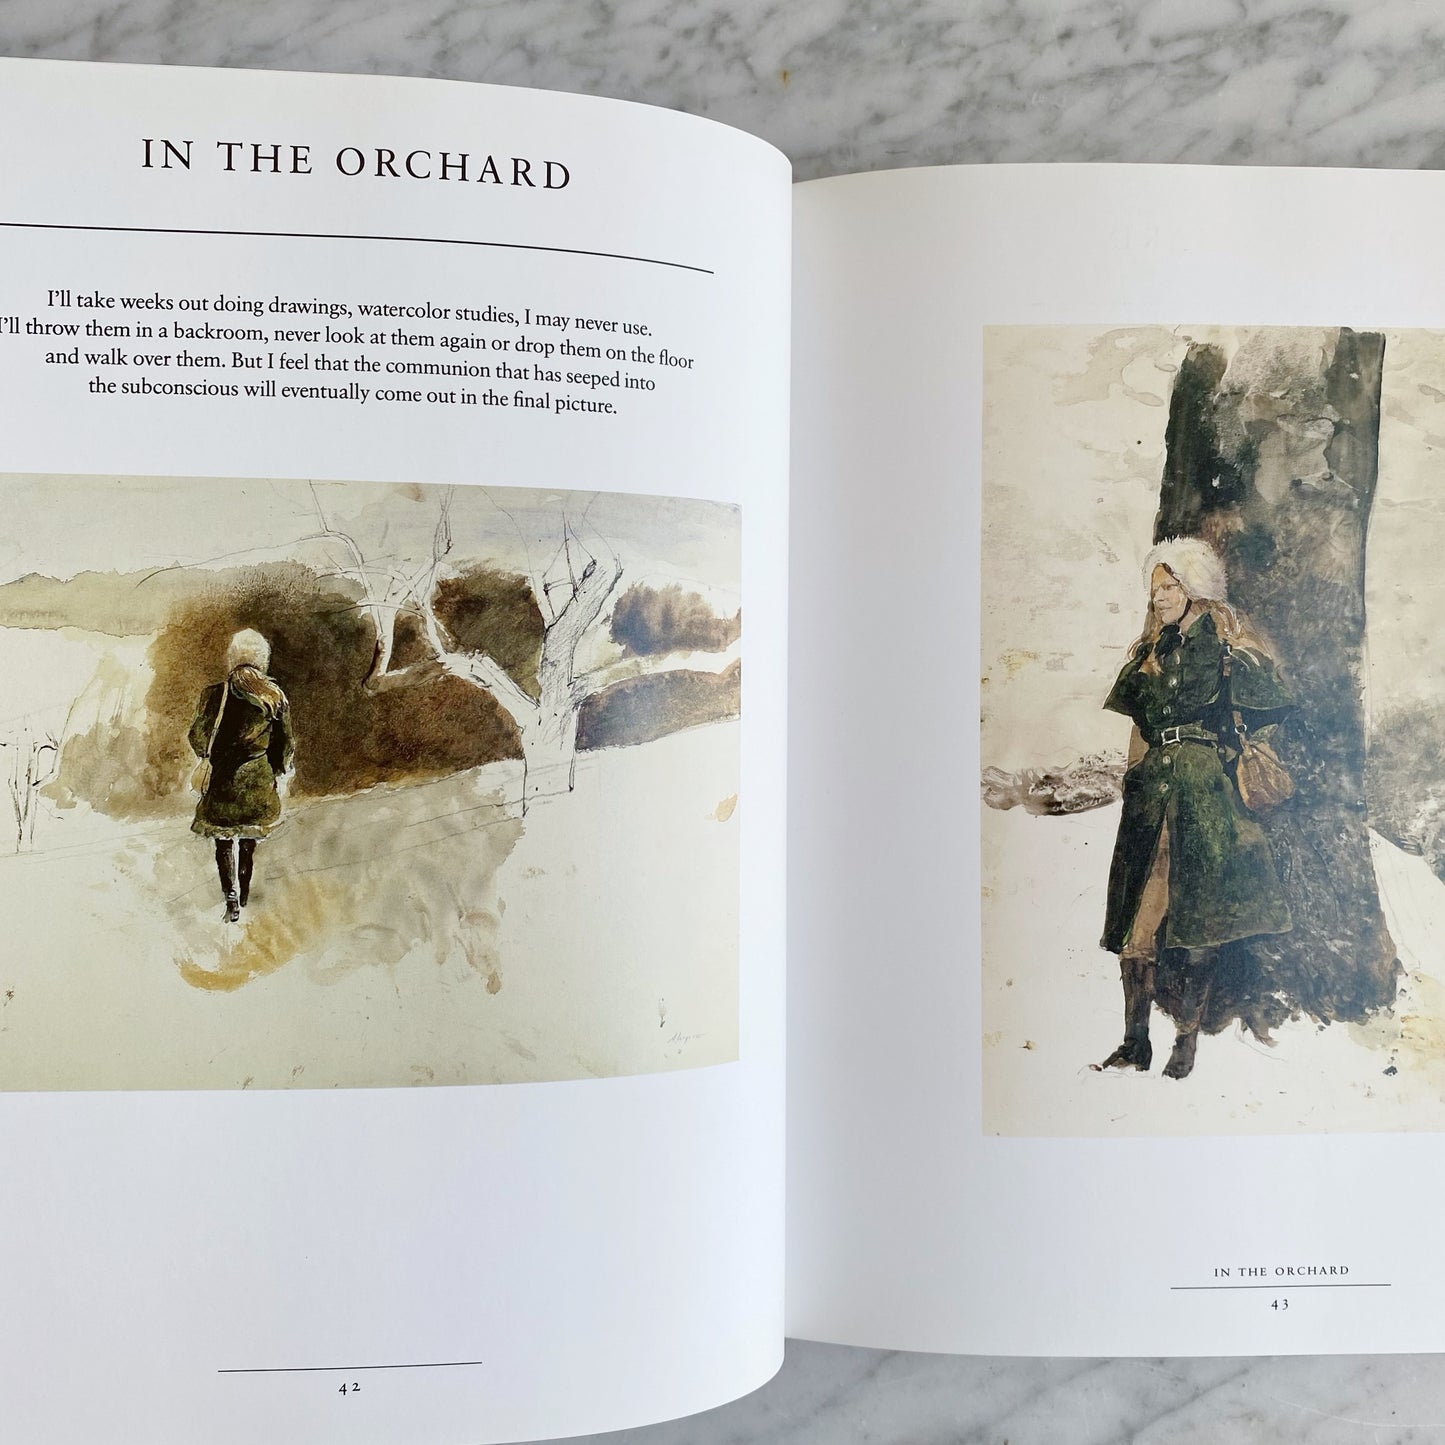 Book: Andrew Wyeth “The Helga Pictures” (1987)